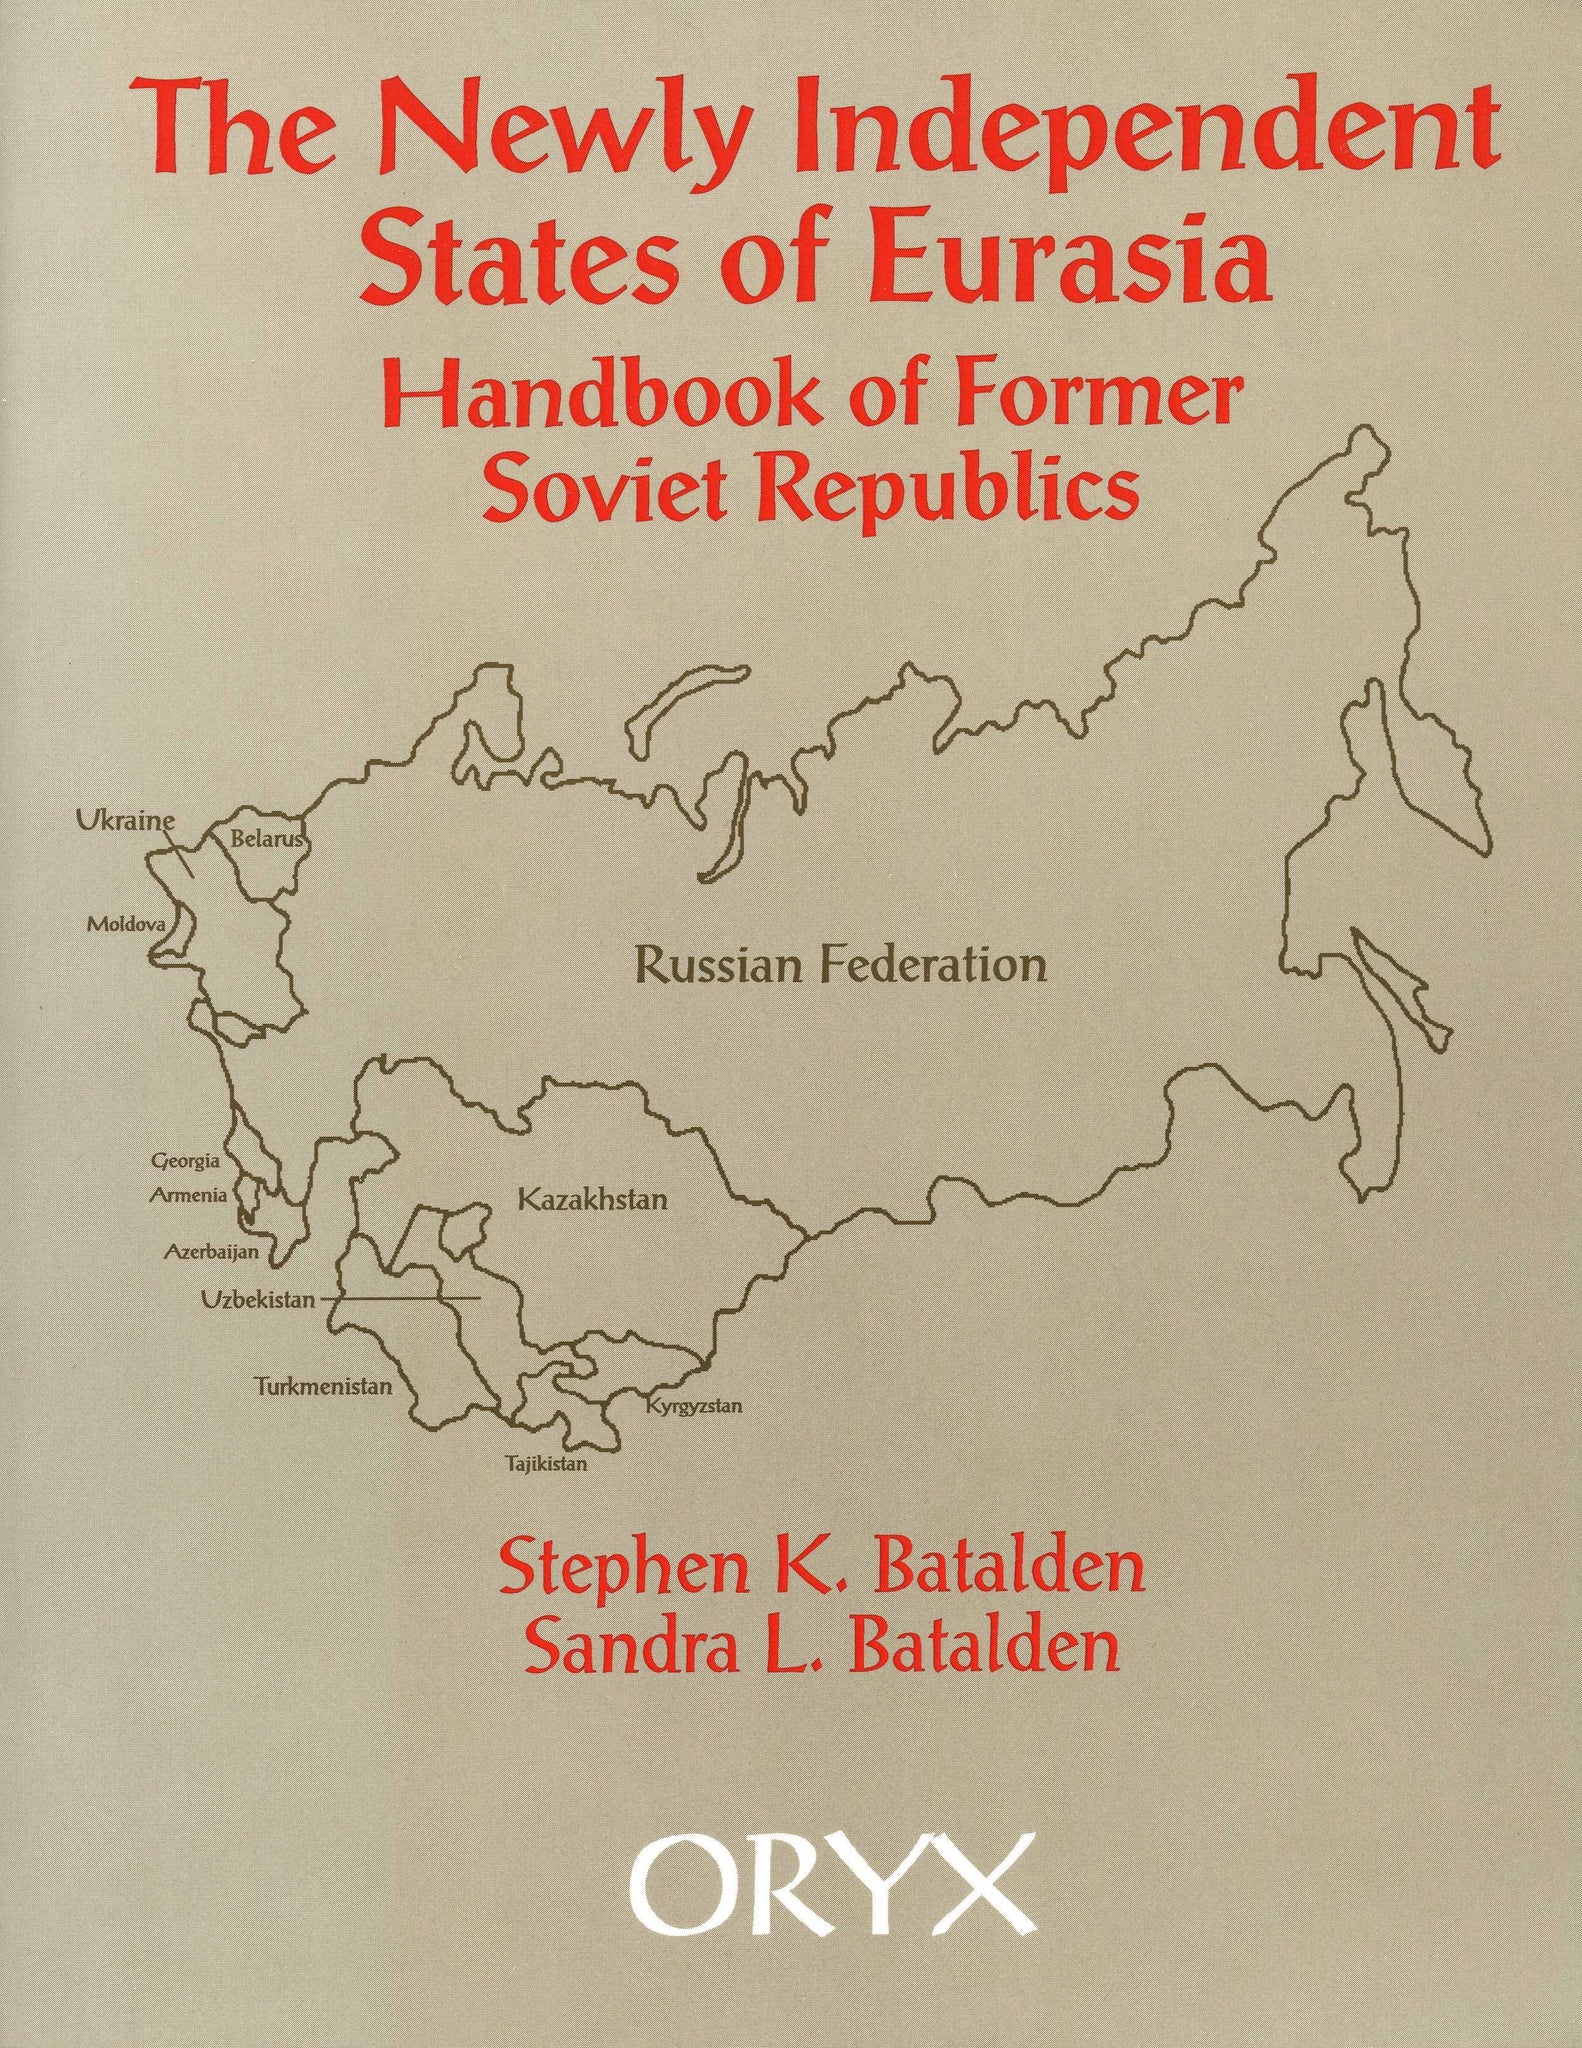 NEWLY INDEPENDENT STATES OF EURASIA: A Handbook of Former Soviet Republics